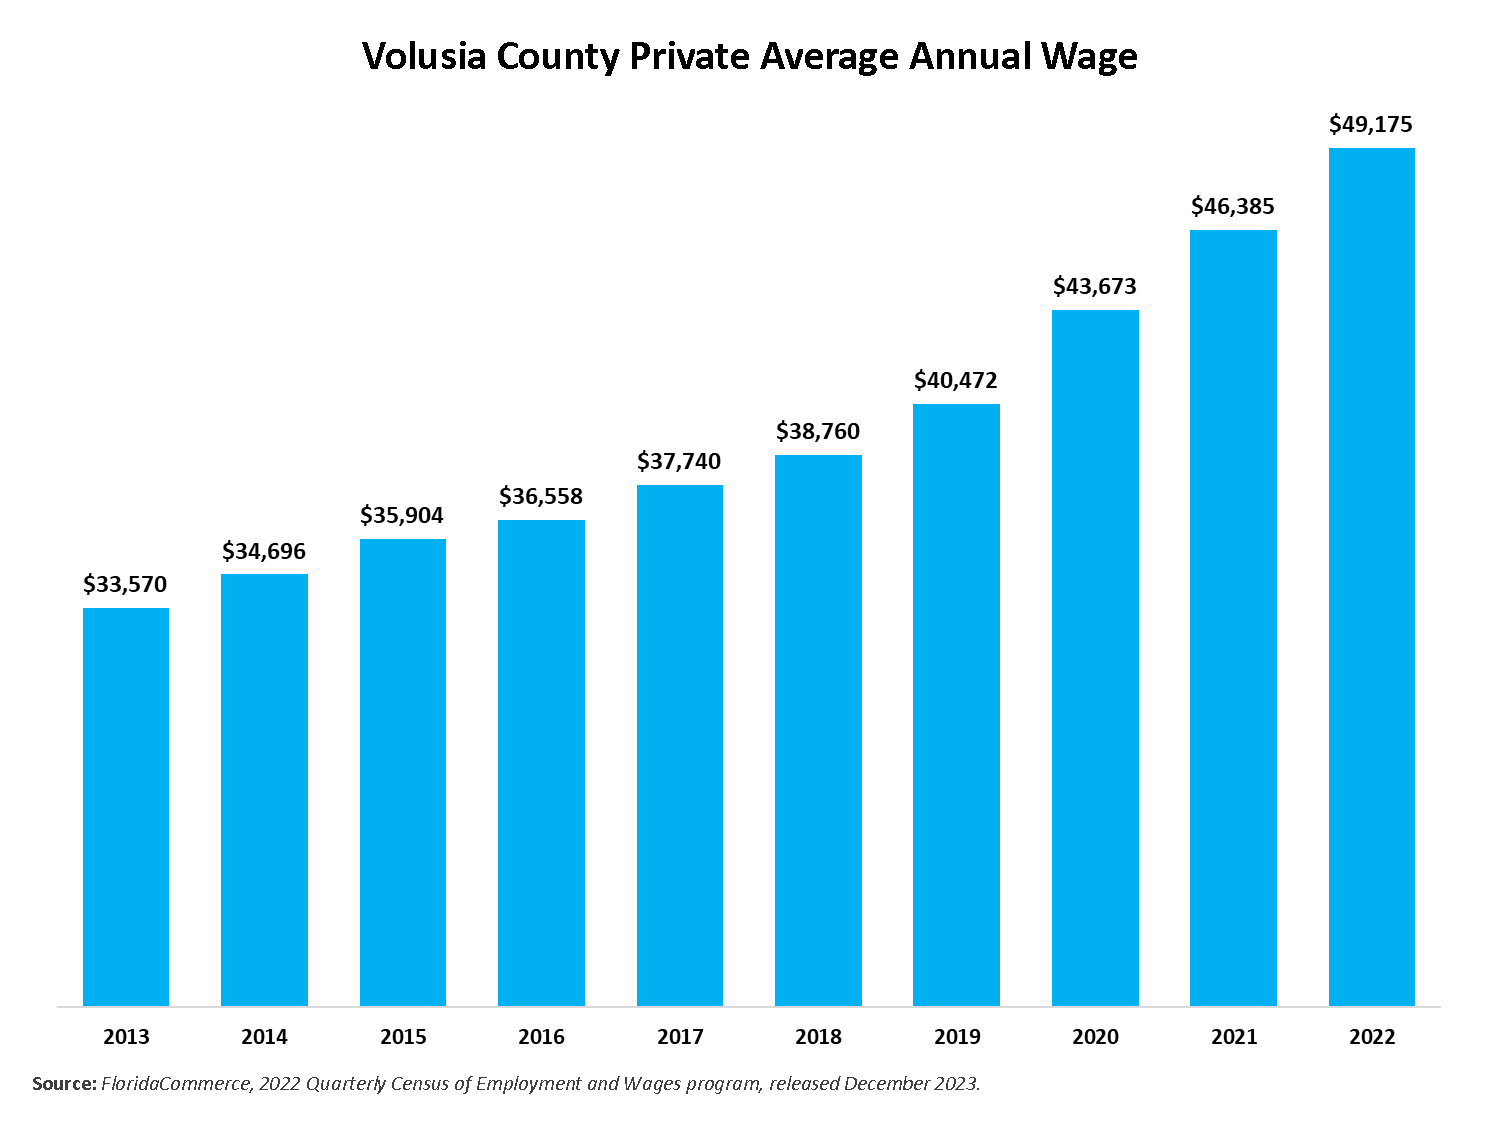 The chart shows Volusia County’s average annual wage trend from 2012 to 2021. Wages increased slightly from 2012 to 2014 and have increased steadily since 2014. 2014 wage was $34,696. 2015 was $35,904. 2016 was $36,558. 2017 was $37,740. 2018 was $38,760. 2019 was $40,472. 2020 was $43,673. The 2021 average wage of $46,385 increased 6.2% from 2020.